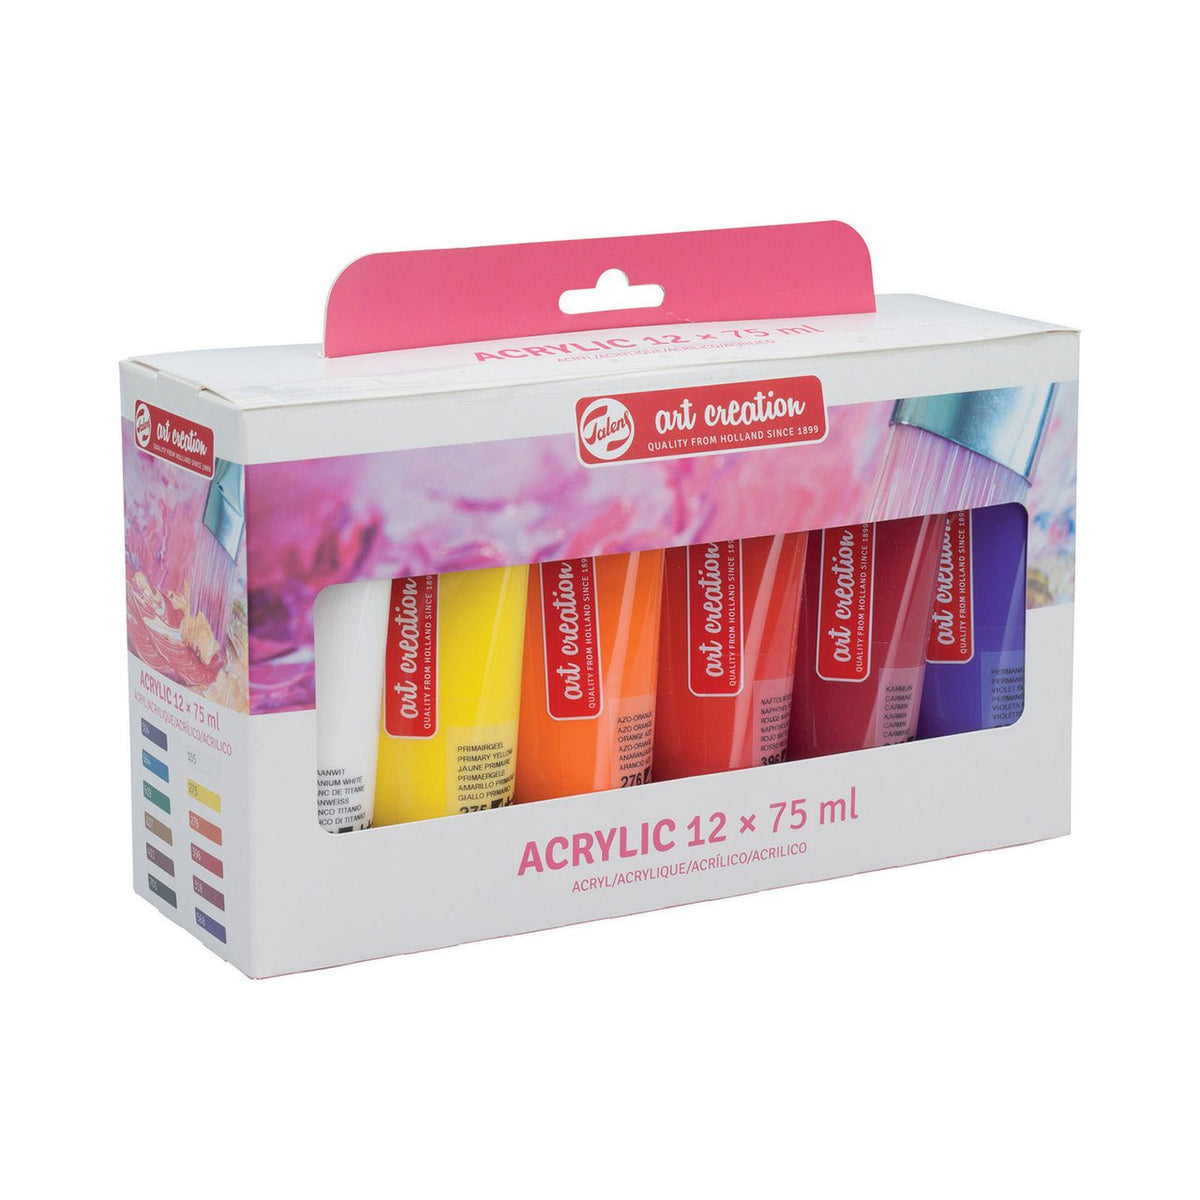 Talens Art Creation Acrylic Set of 12 Colors in 75ml Tubes - merriartist.com